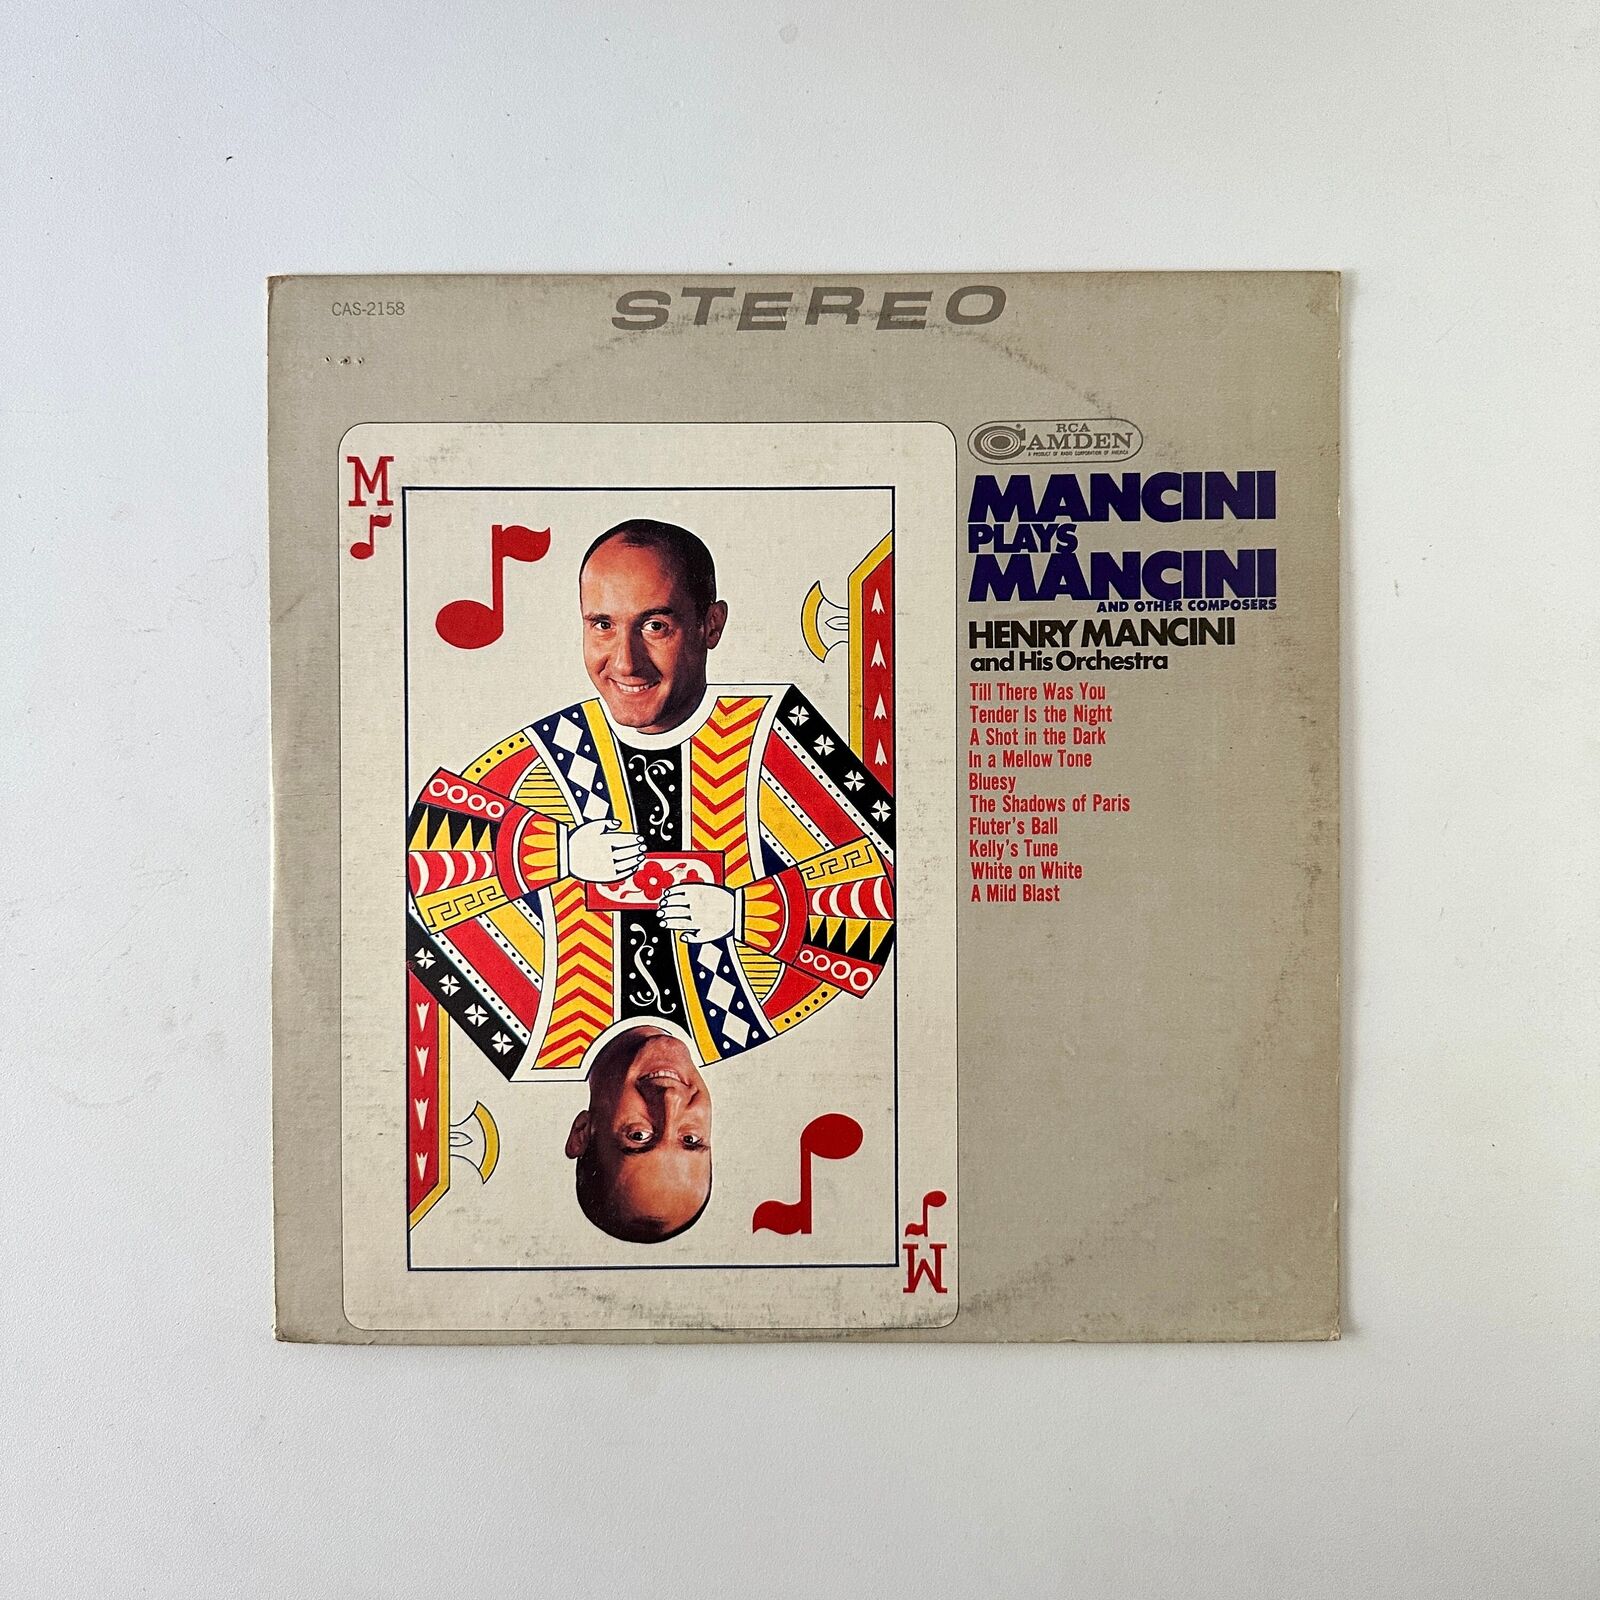 Henry Mancini And His Orchestra - Mancini Plays Mancini And Other Composers - V